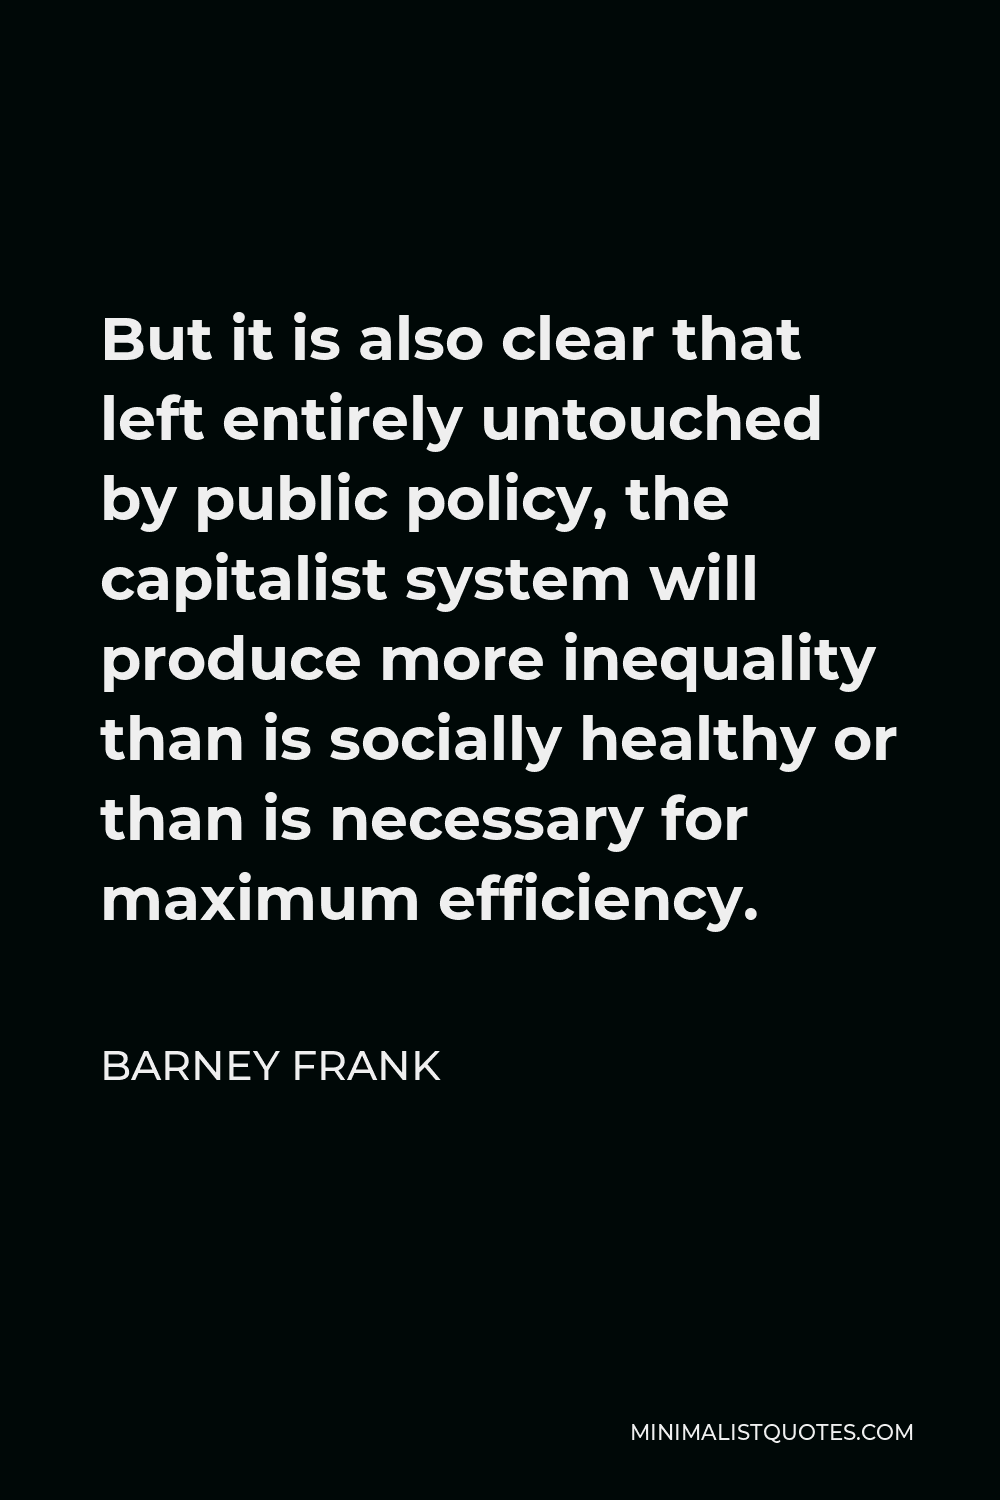 Barney Frank Quote - But it is also clear that left entirely untouched by public policy, the capitalist system will produce more inequality than is socially healthy or than is necessary for maximum efficiency.